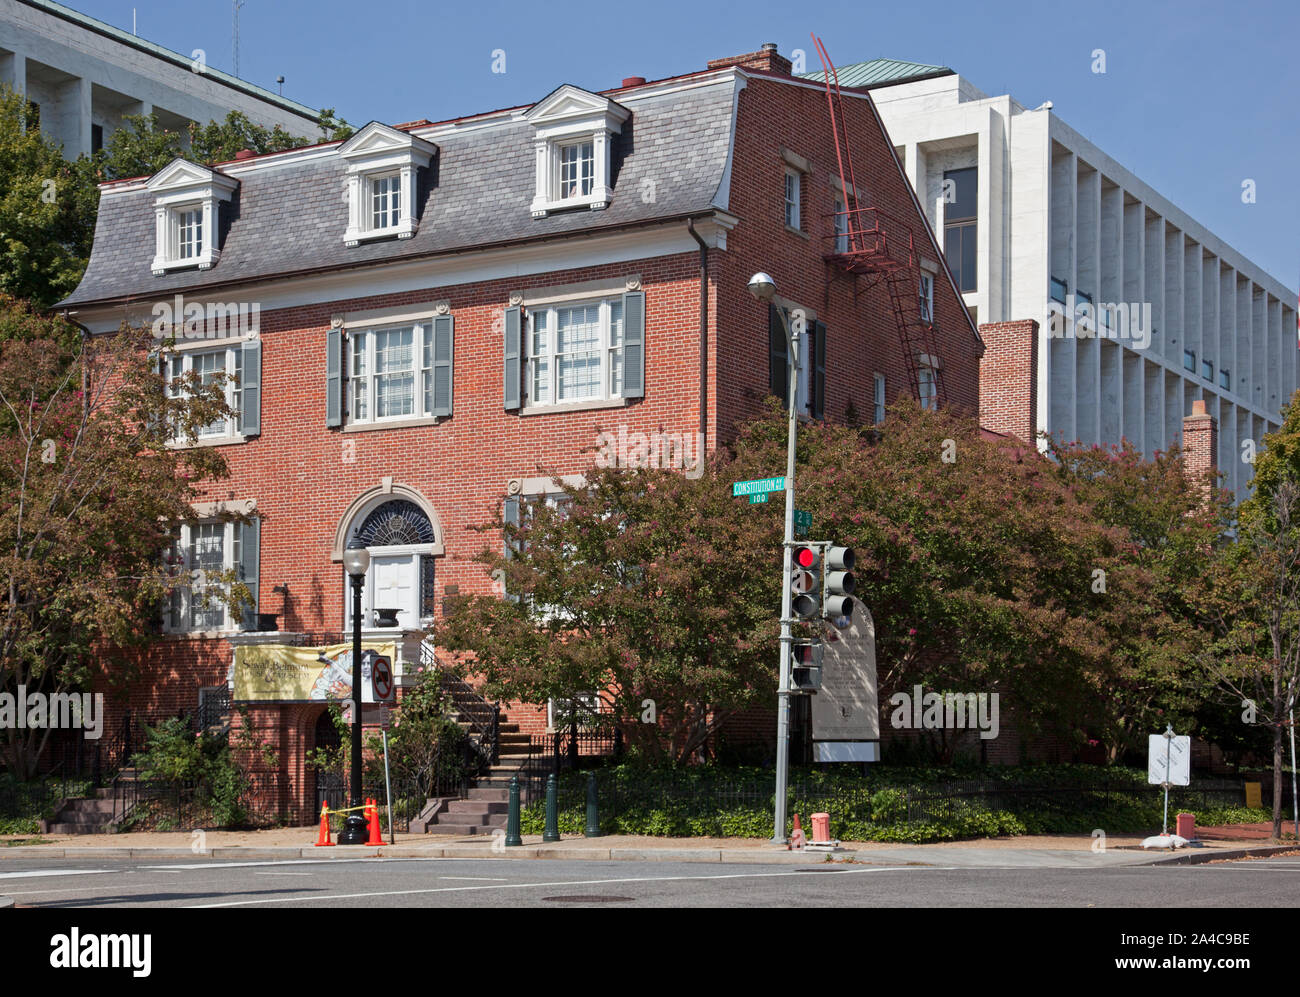 The Sewall-Belmont House, the corner of Constitution Ave. and 2nd St., NE, Washington, D.C Stock Photo